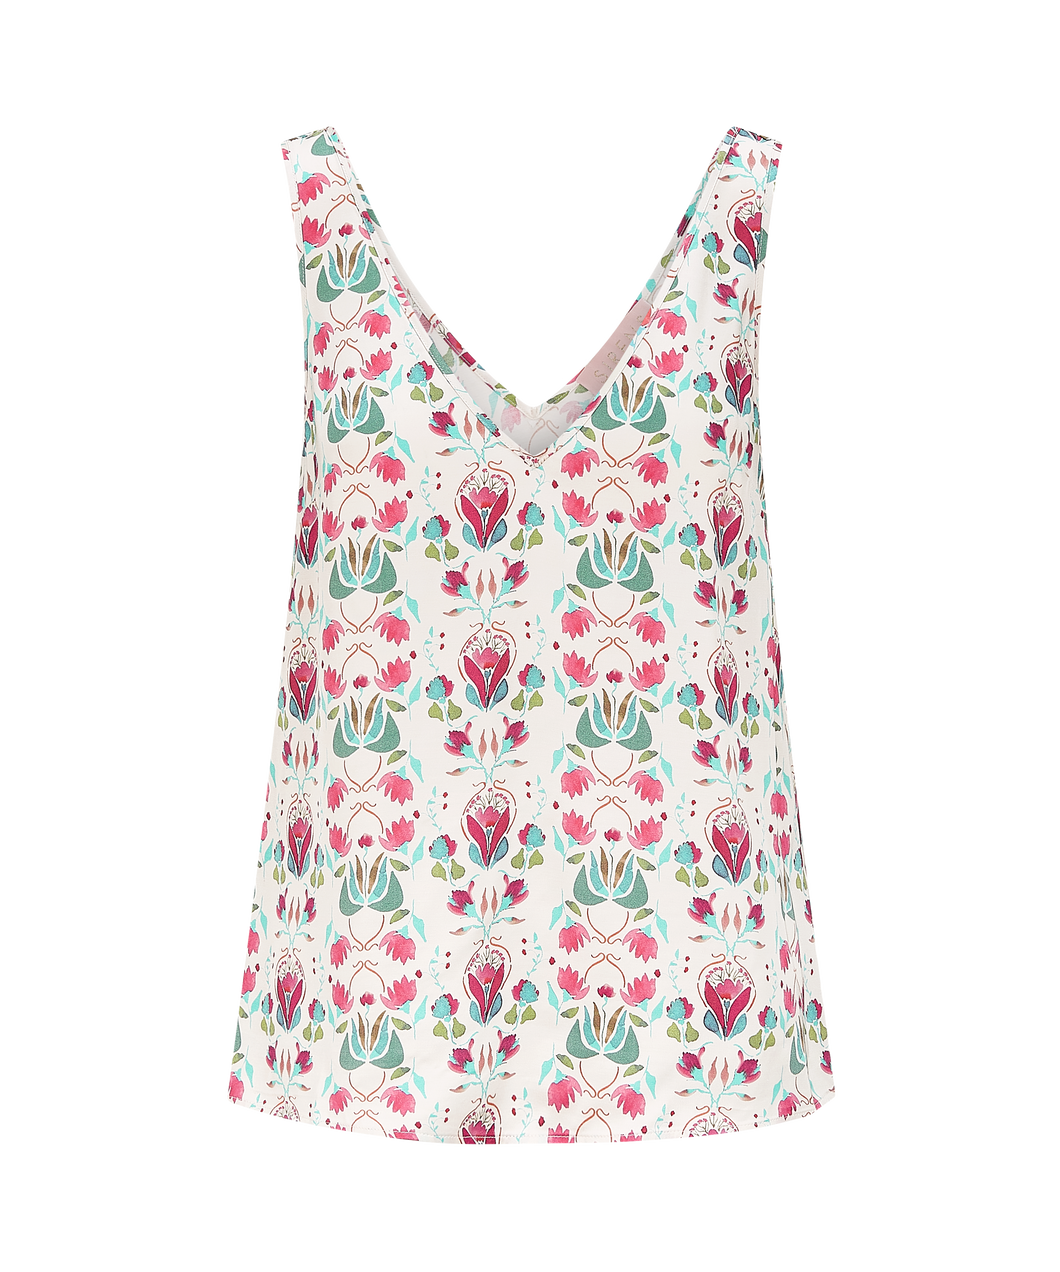 Beautiful V neck camisole, designed to compliment any shape. Elegant V back and shoulder straps wide enough to cover a bra. 

Stunning floral hand painted print to match any look.

Size Guide

Available in sizes UK 8-14

Size UK	 8	10	12	14